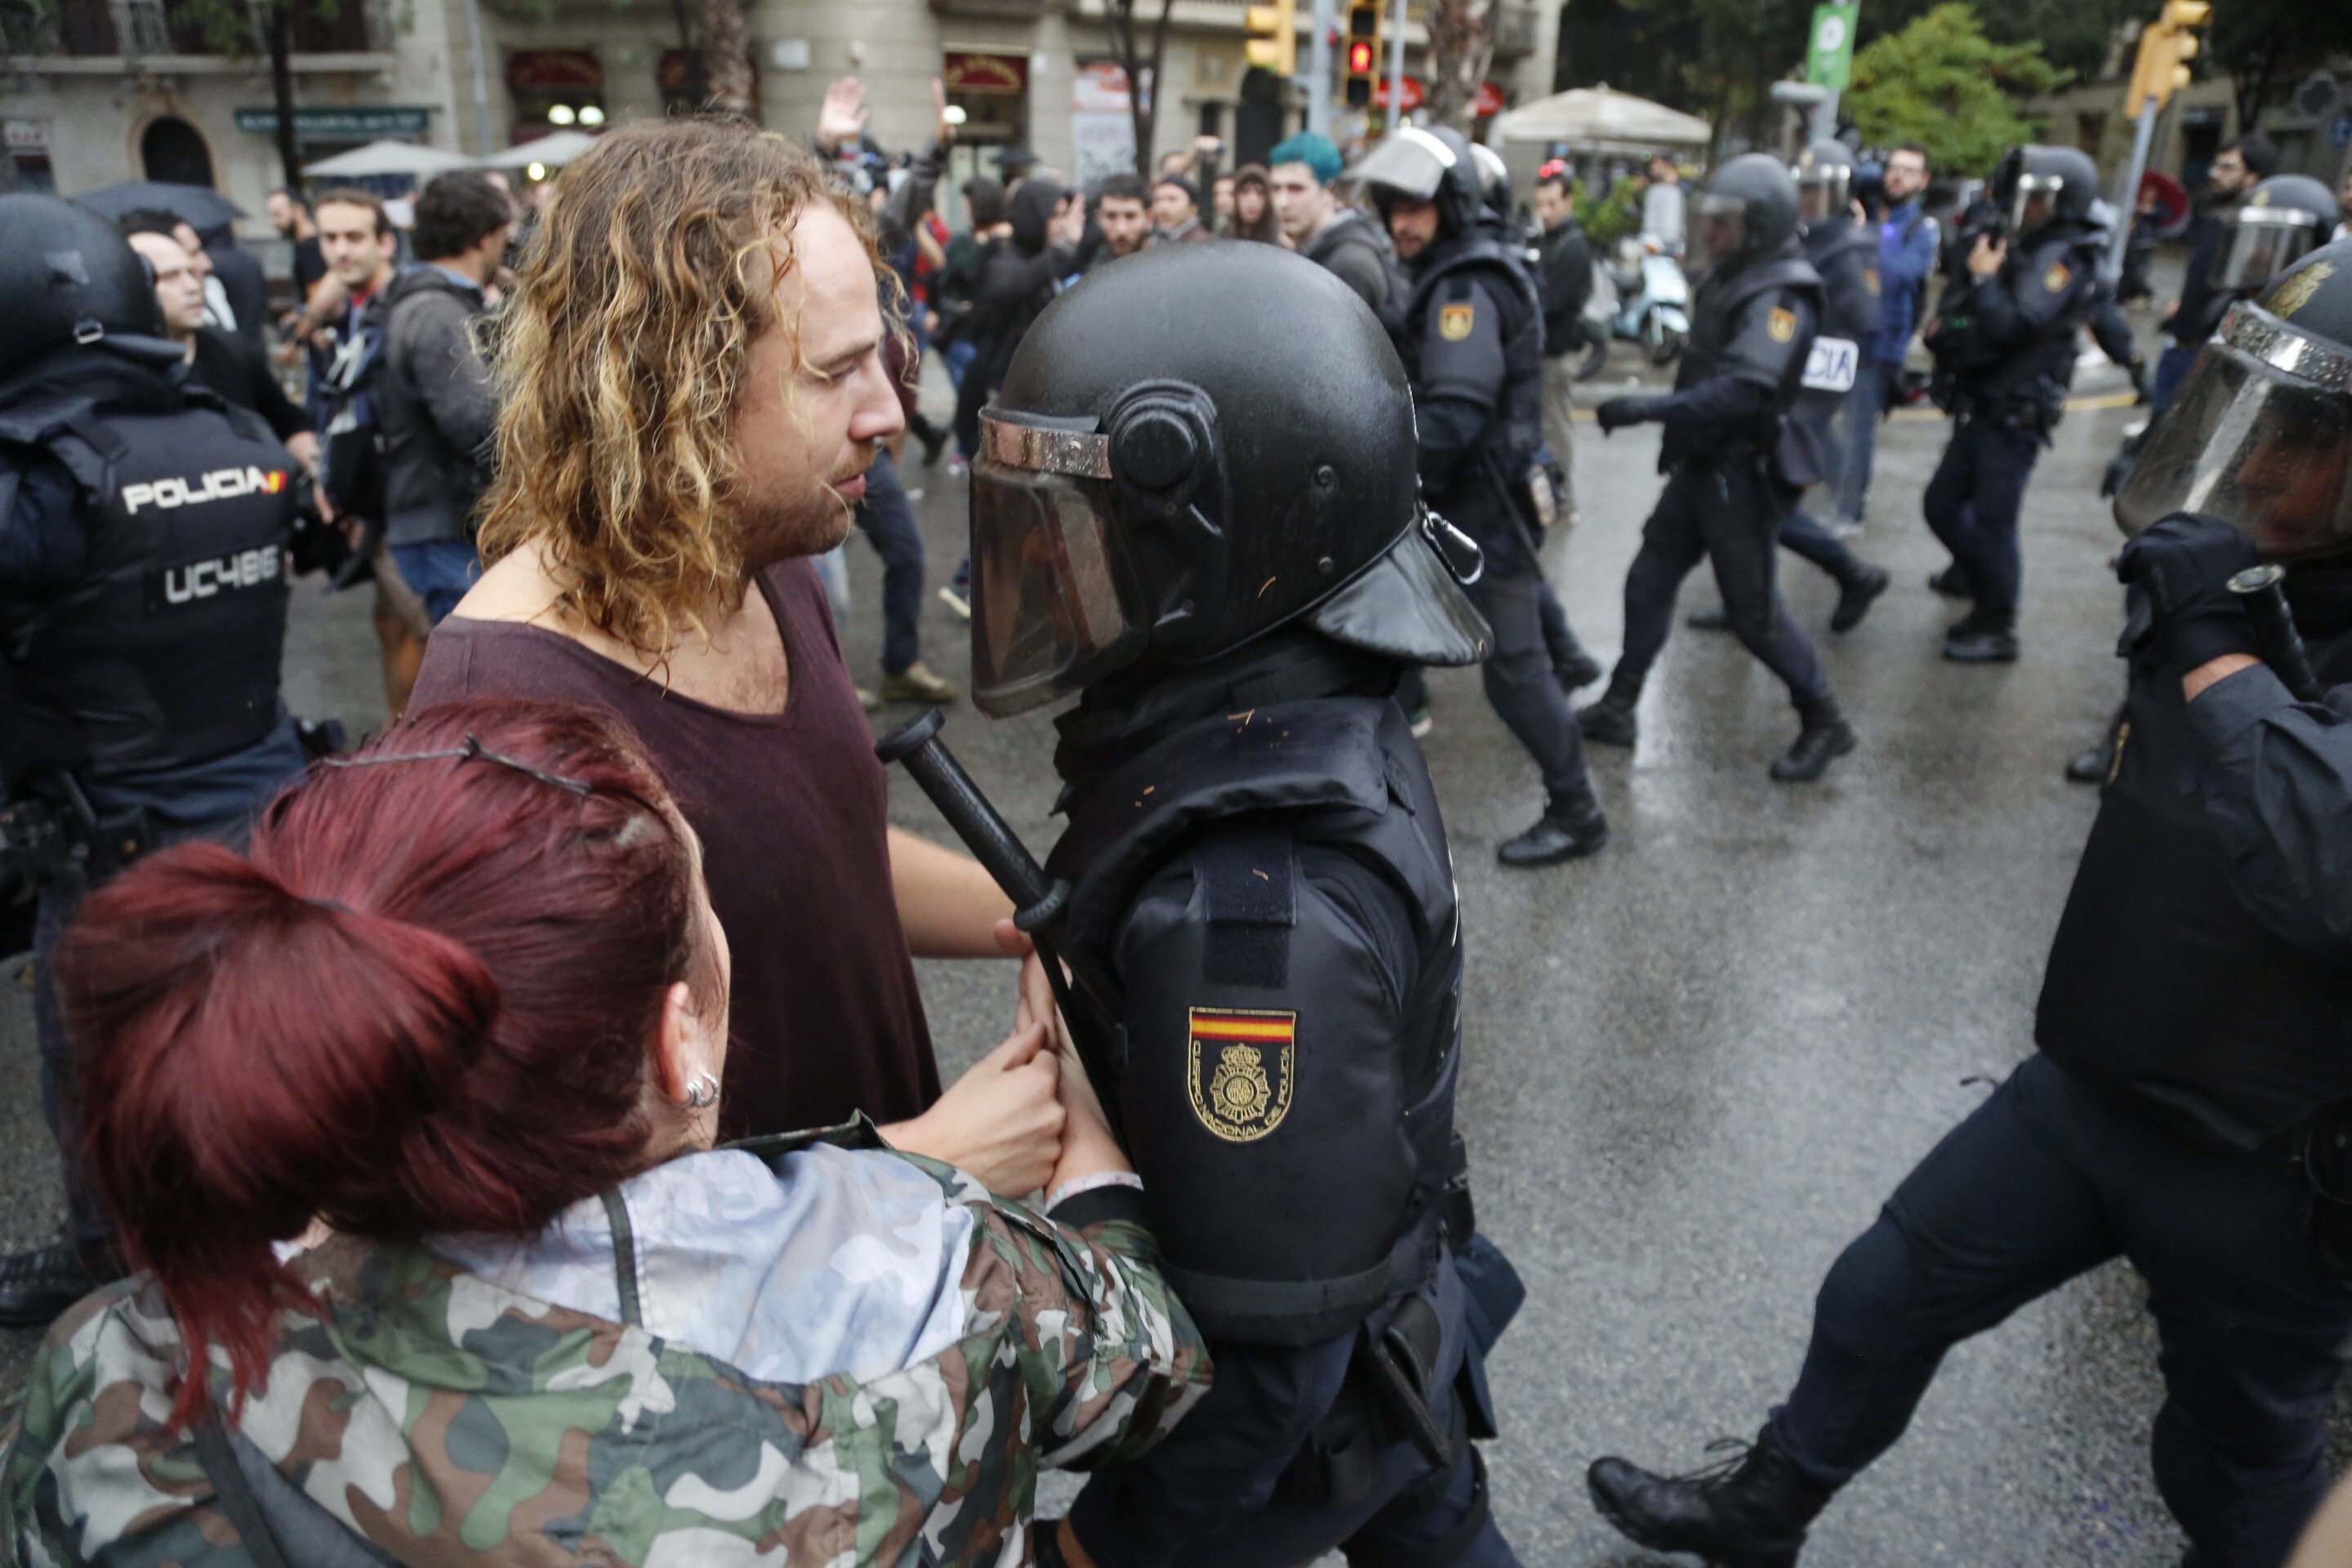 VIDEO: Spanish police use force to stop the referendum